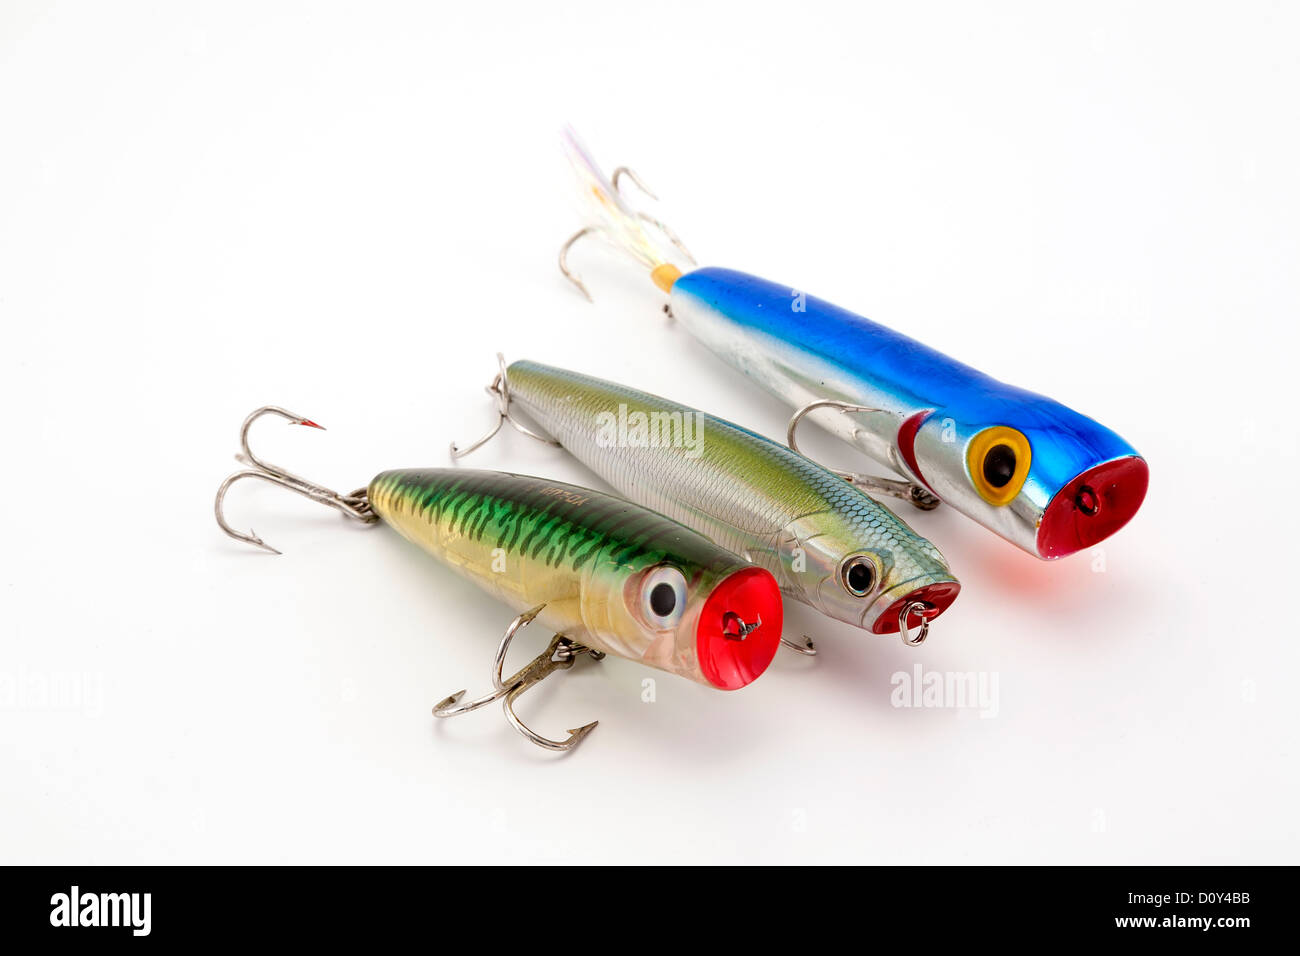 Sea fishing lures Cut Out Stock Images & Pictures - Alamy